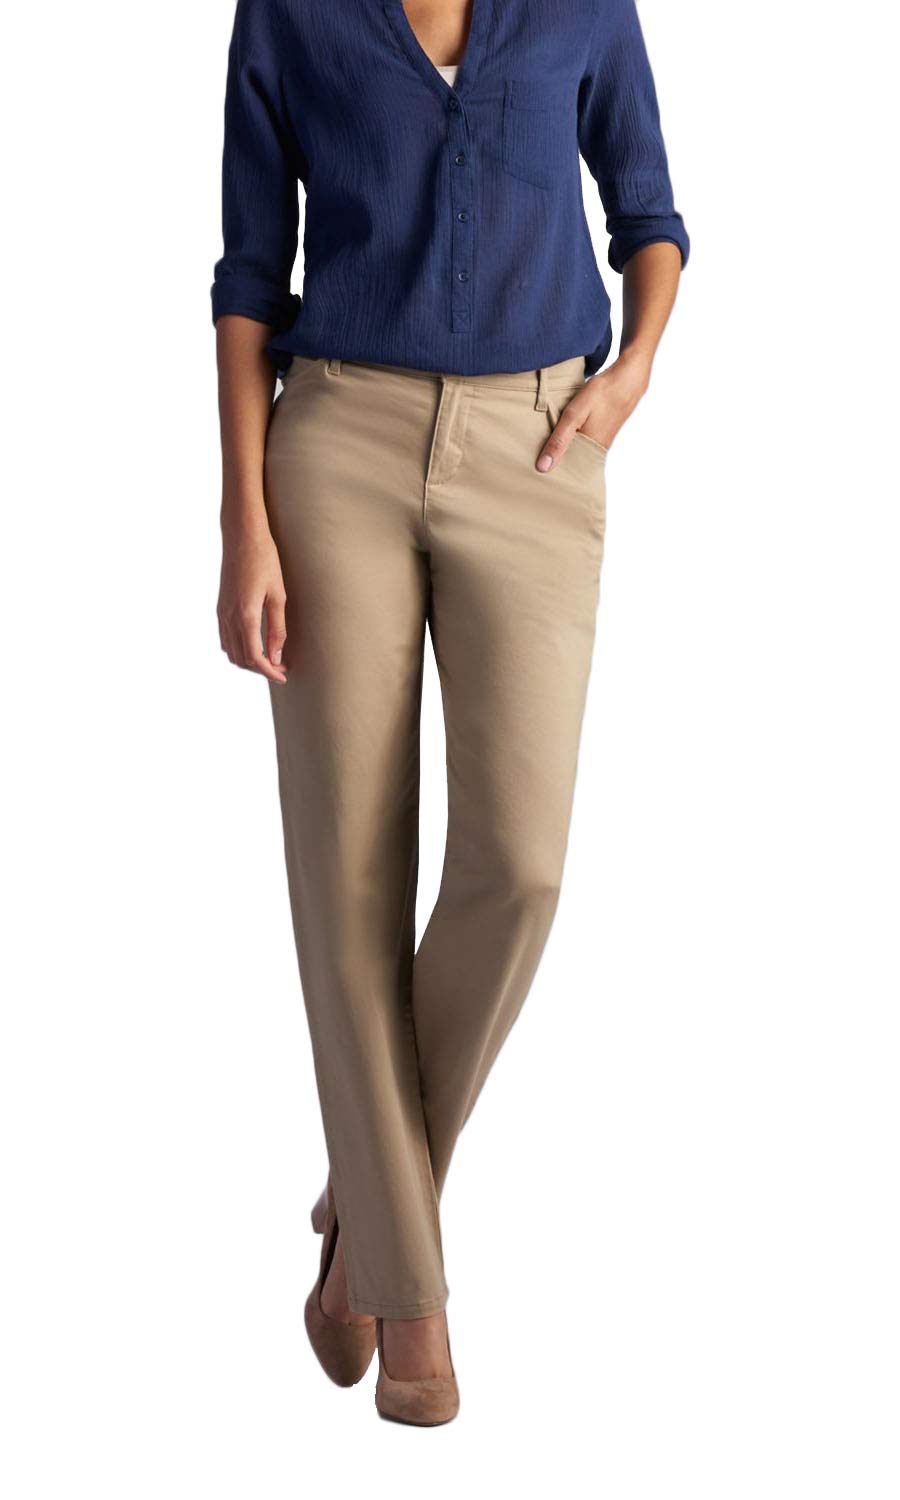 Lee Women's Relaxed Fit All Day Straight Leg Pant Dark Beige 10 Short